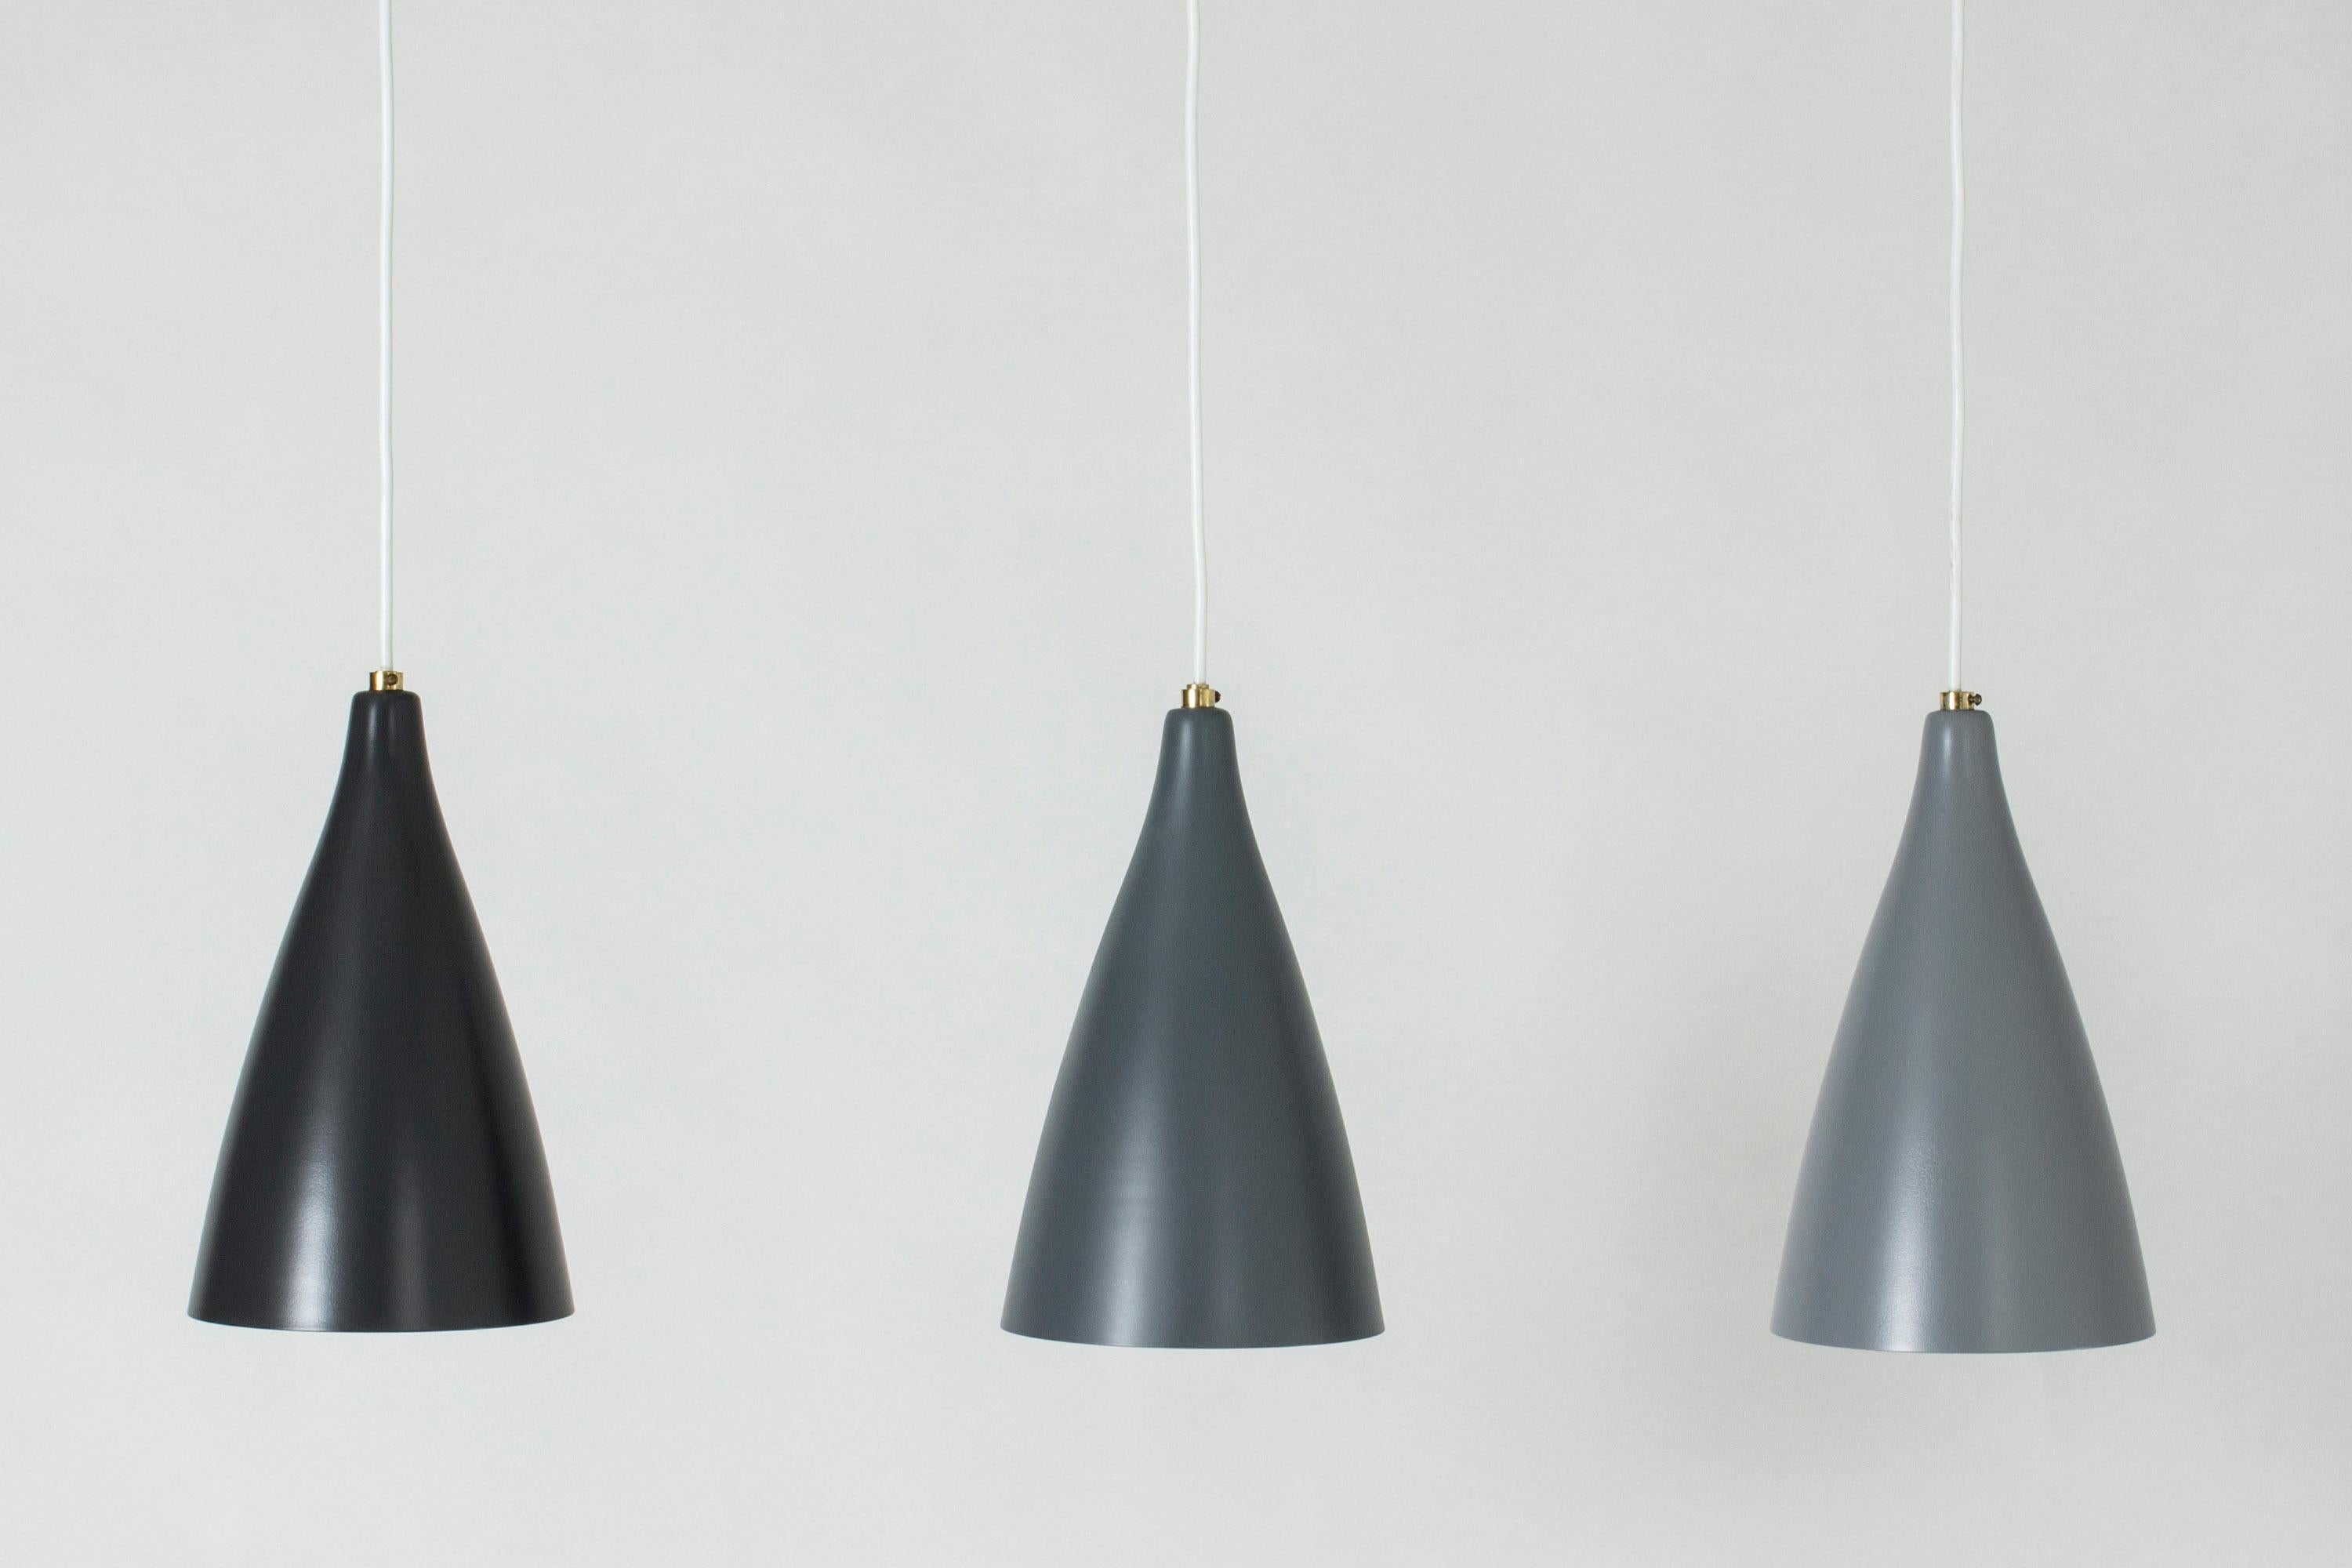 Set of three lacquered metal ceiling lamps from Böhlmarks, in three nuances of grey. Clean design with a small brass detail on top. Can be suspended at different heights.